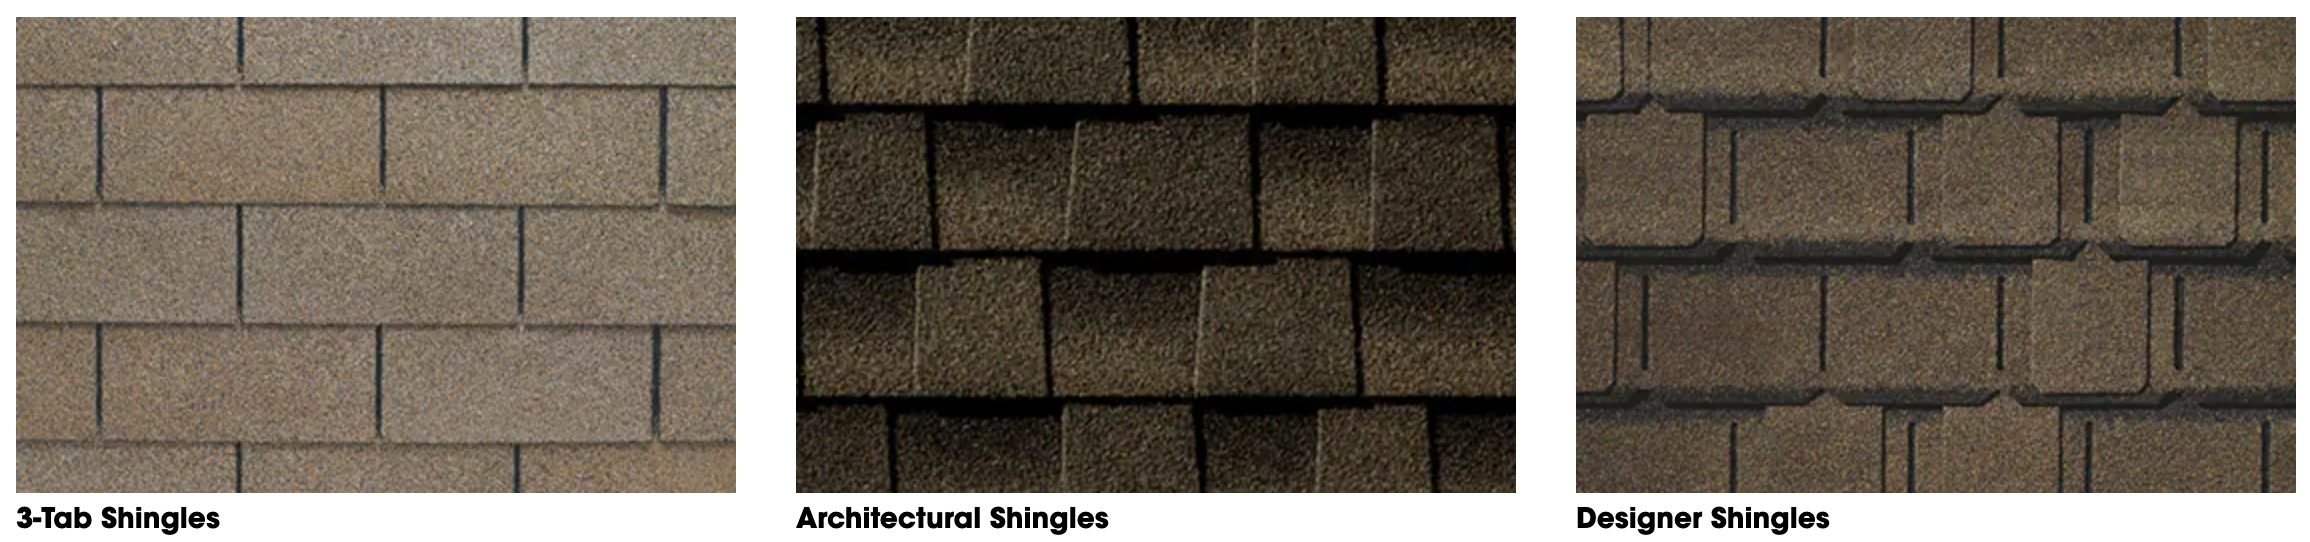 Types of roofing shingles